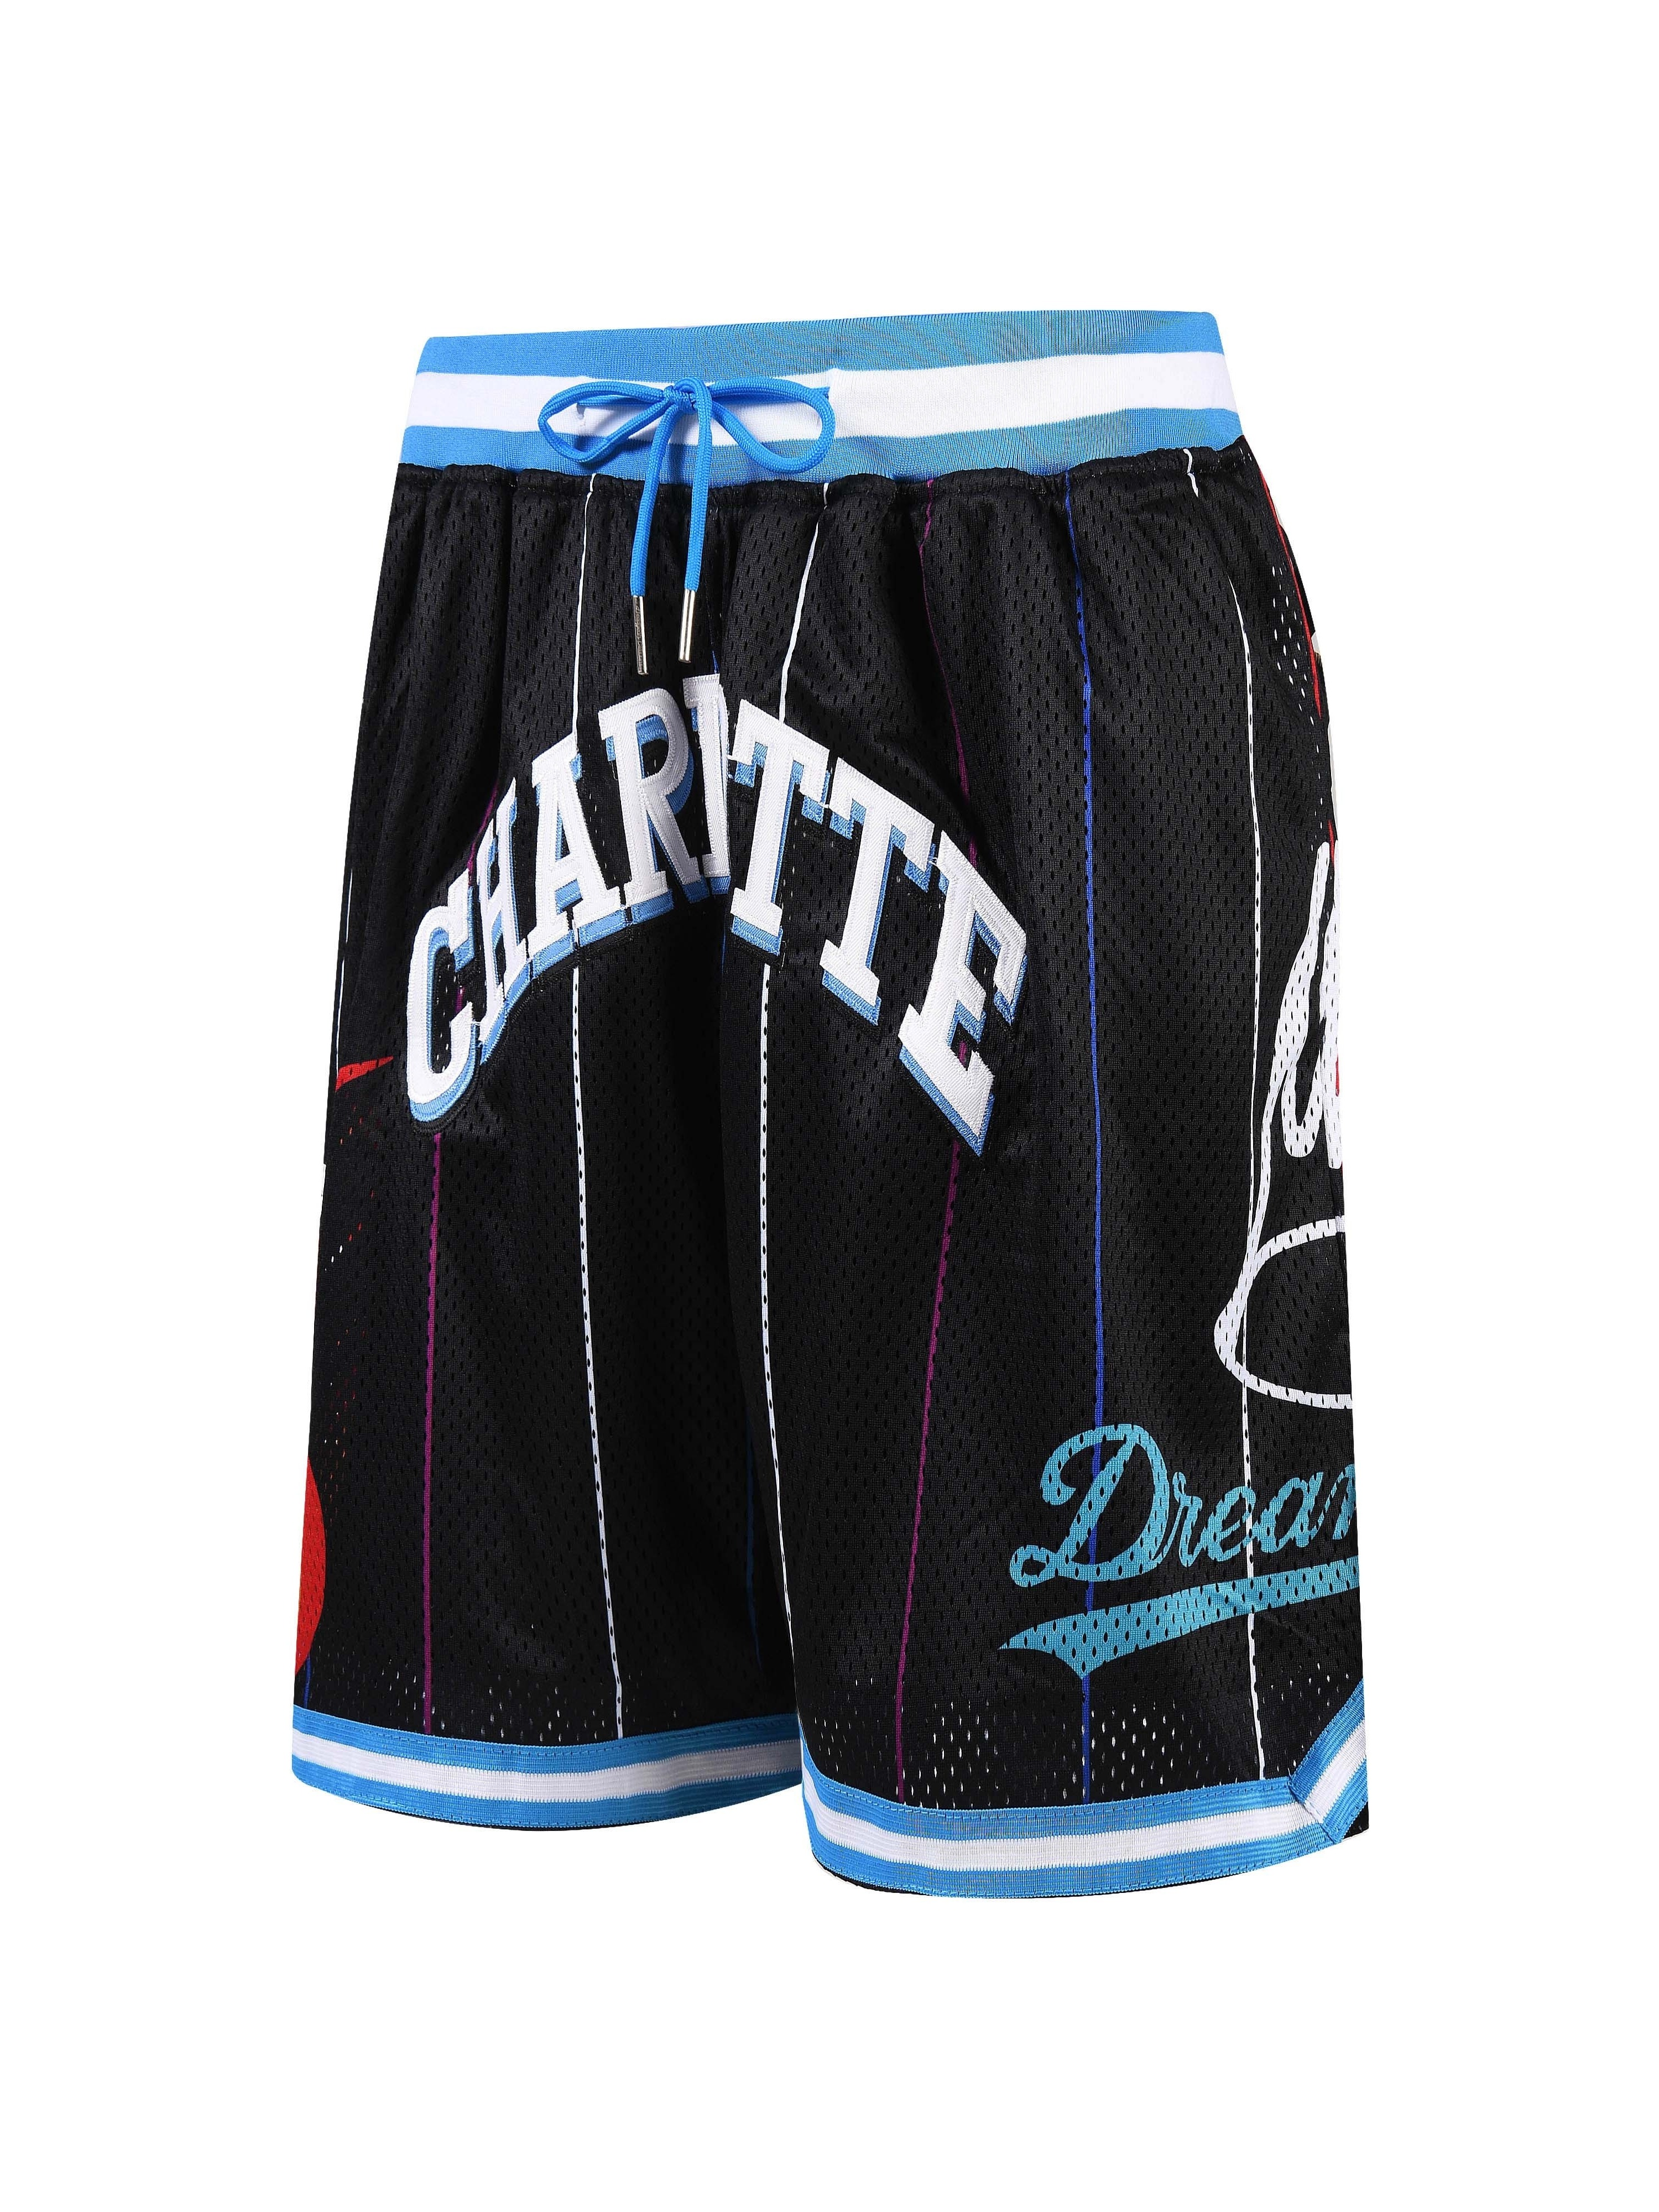 Plus Size Men's Charitte Print Basketball Shorts, Oversized Fashion Sports Quick Dry Breathable Shorts for Big & Tall Males, Men's Clothing,Temu